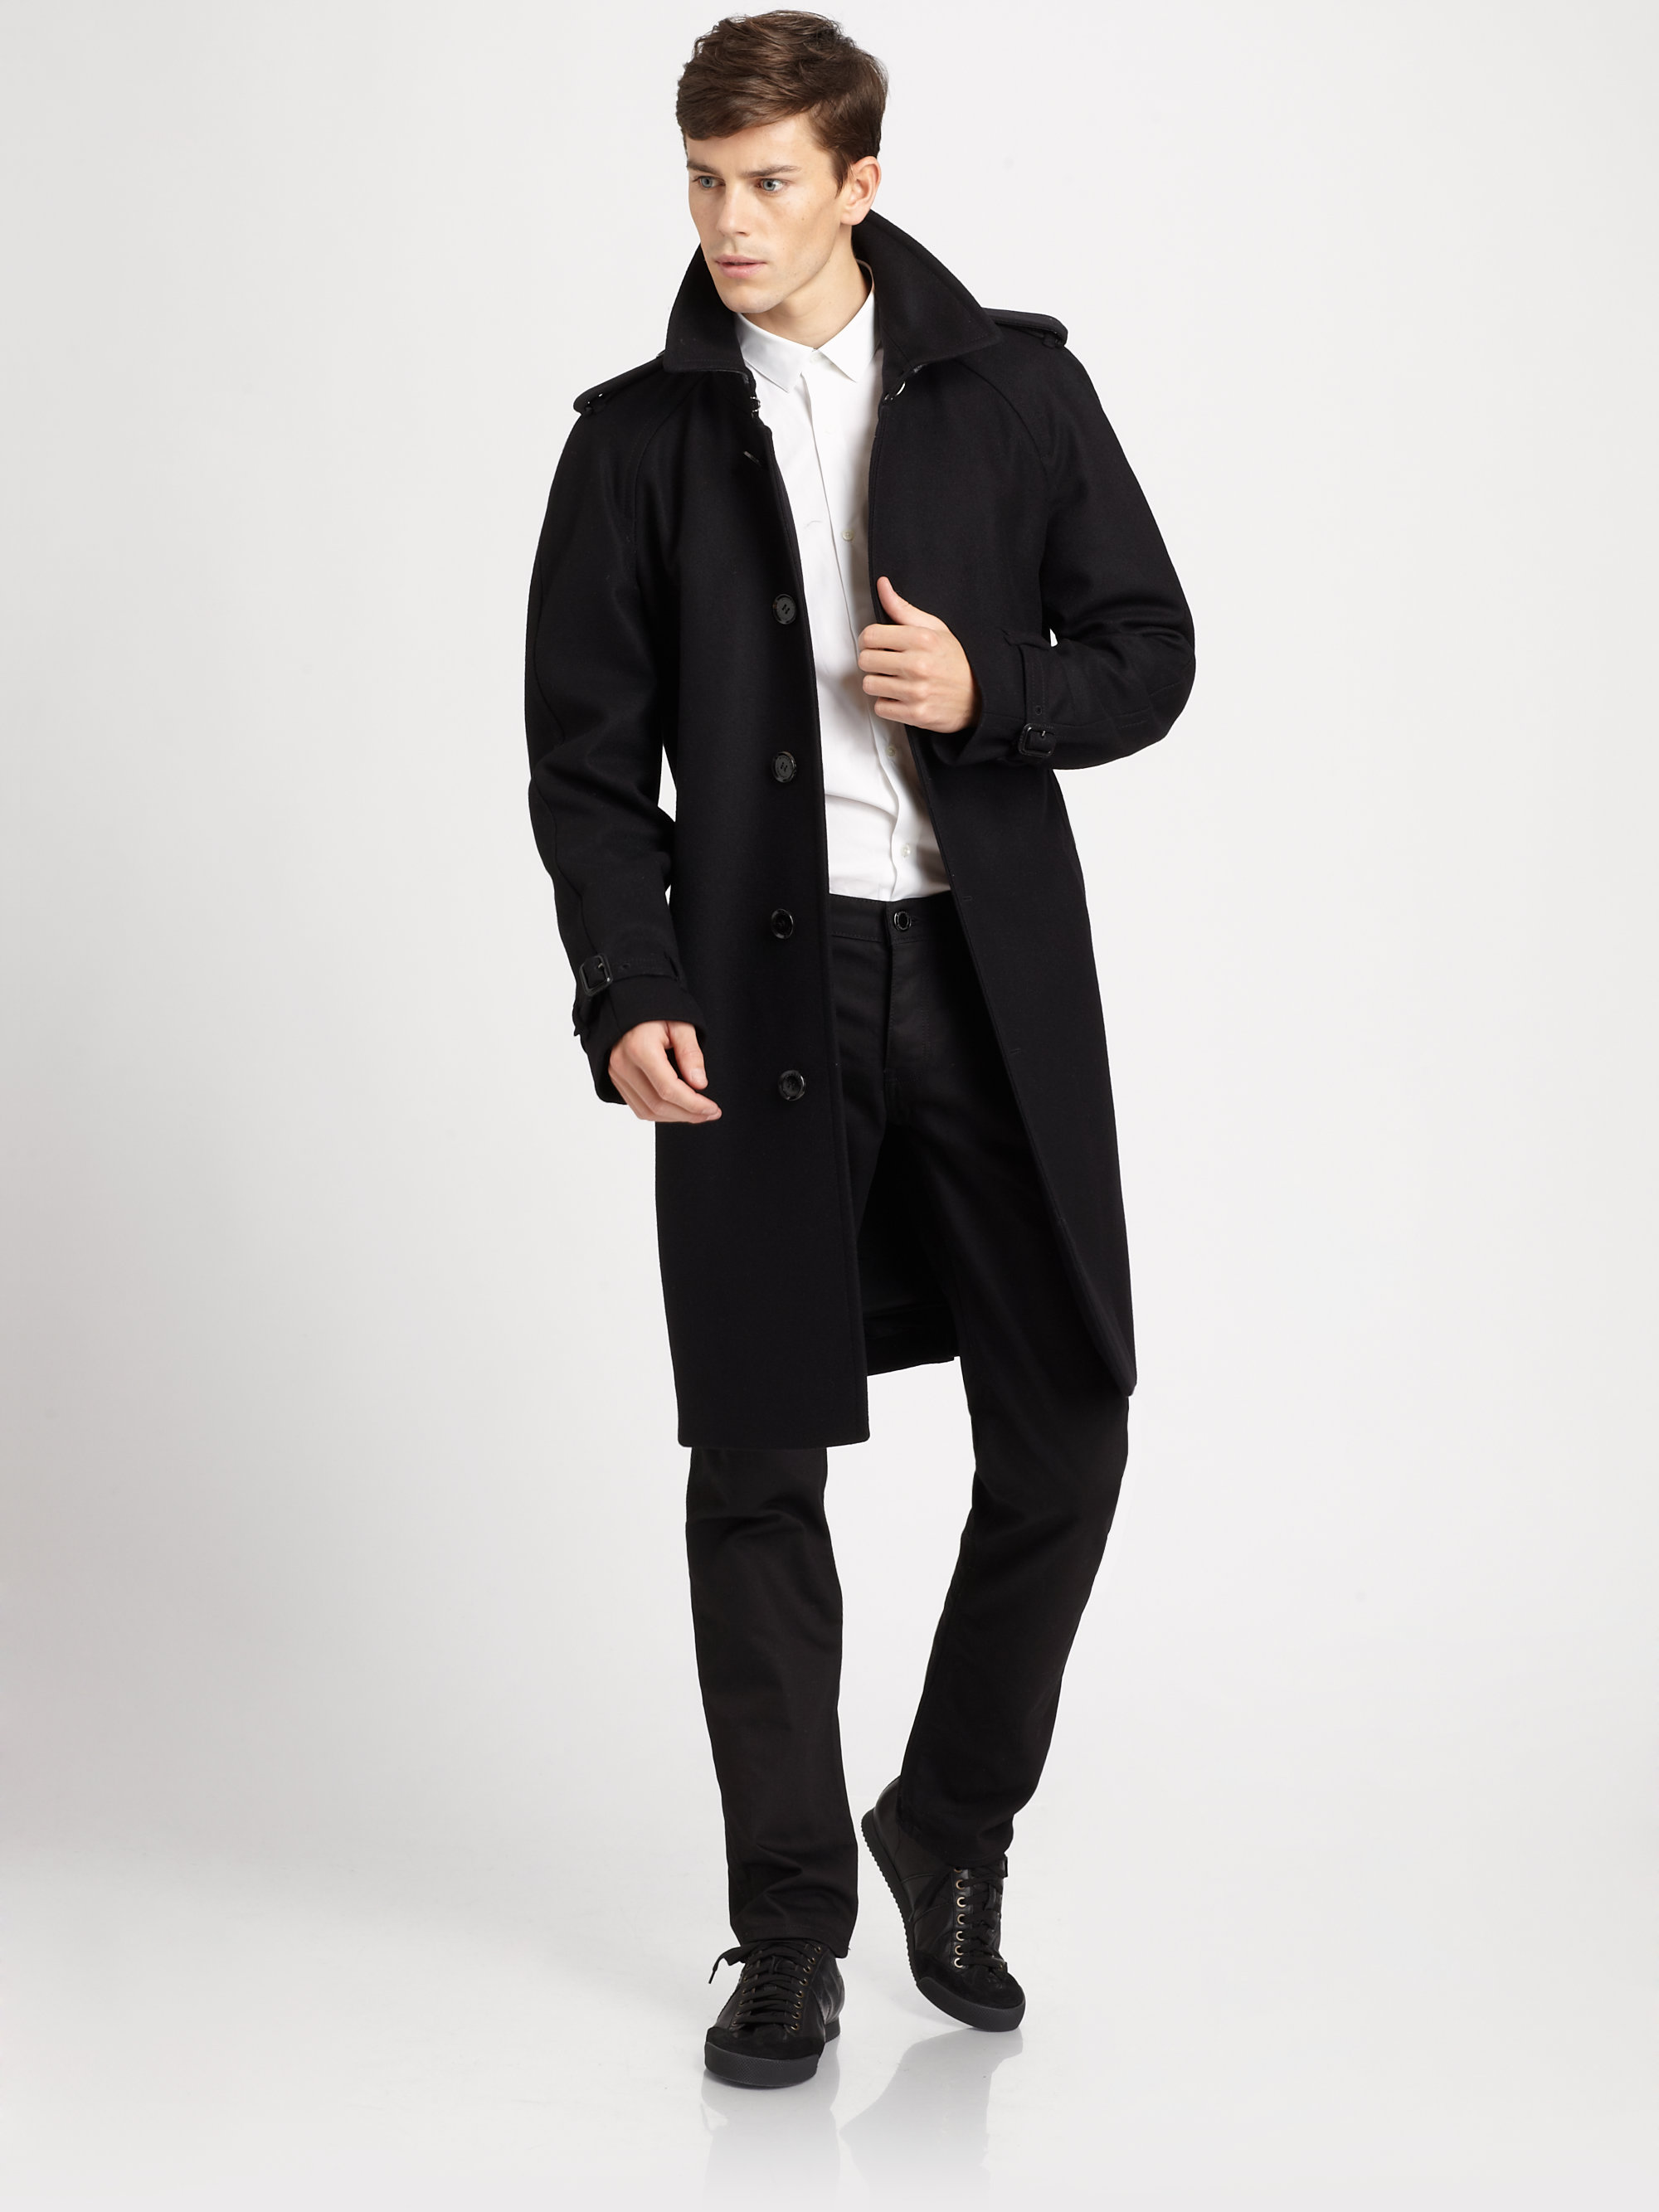 Lyst - Burberry Wool Single Breasted Trench Coat in Black for Men